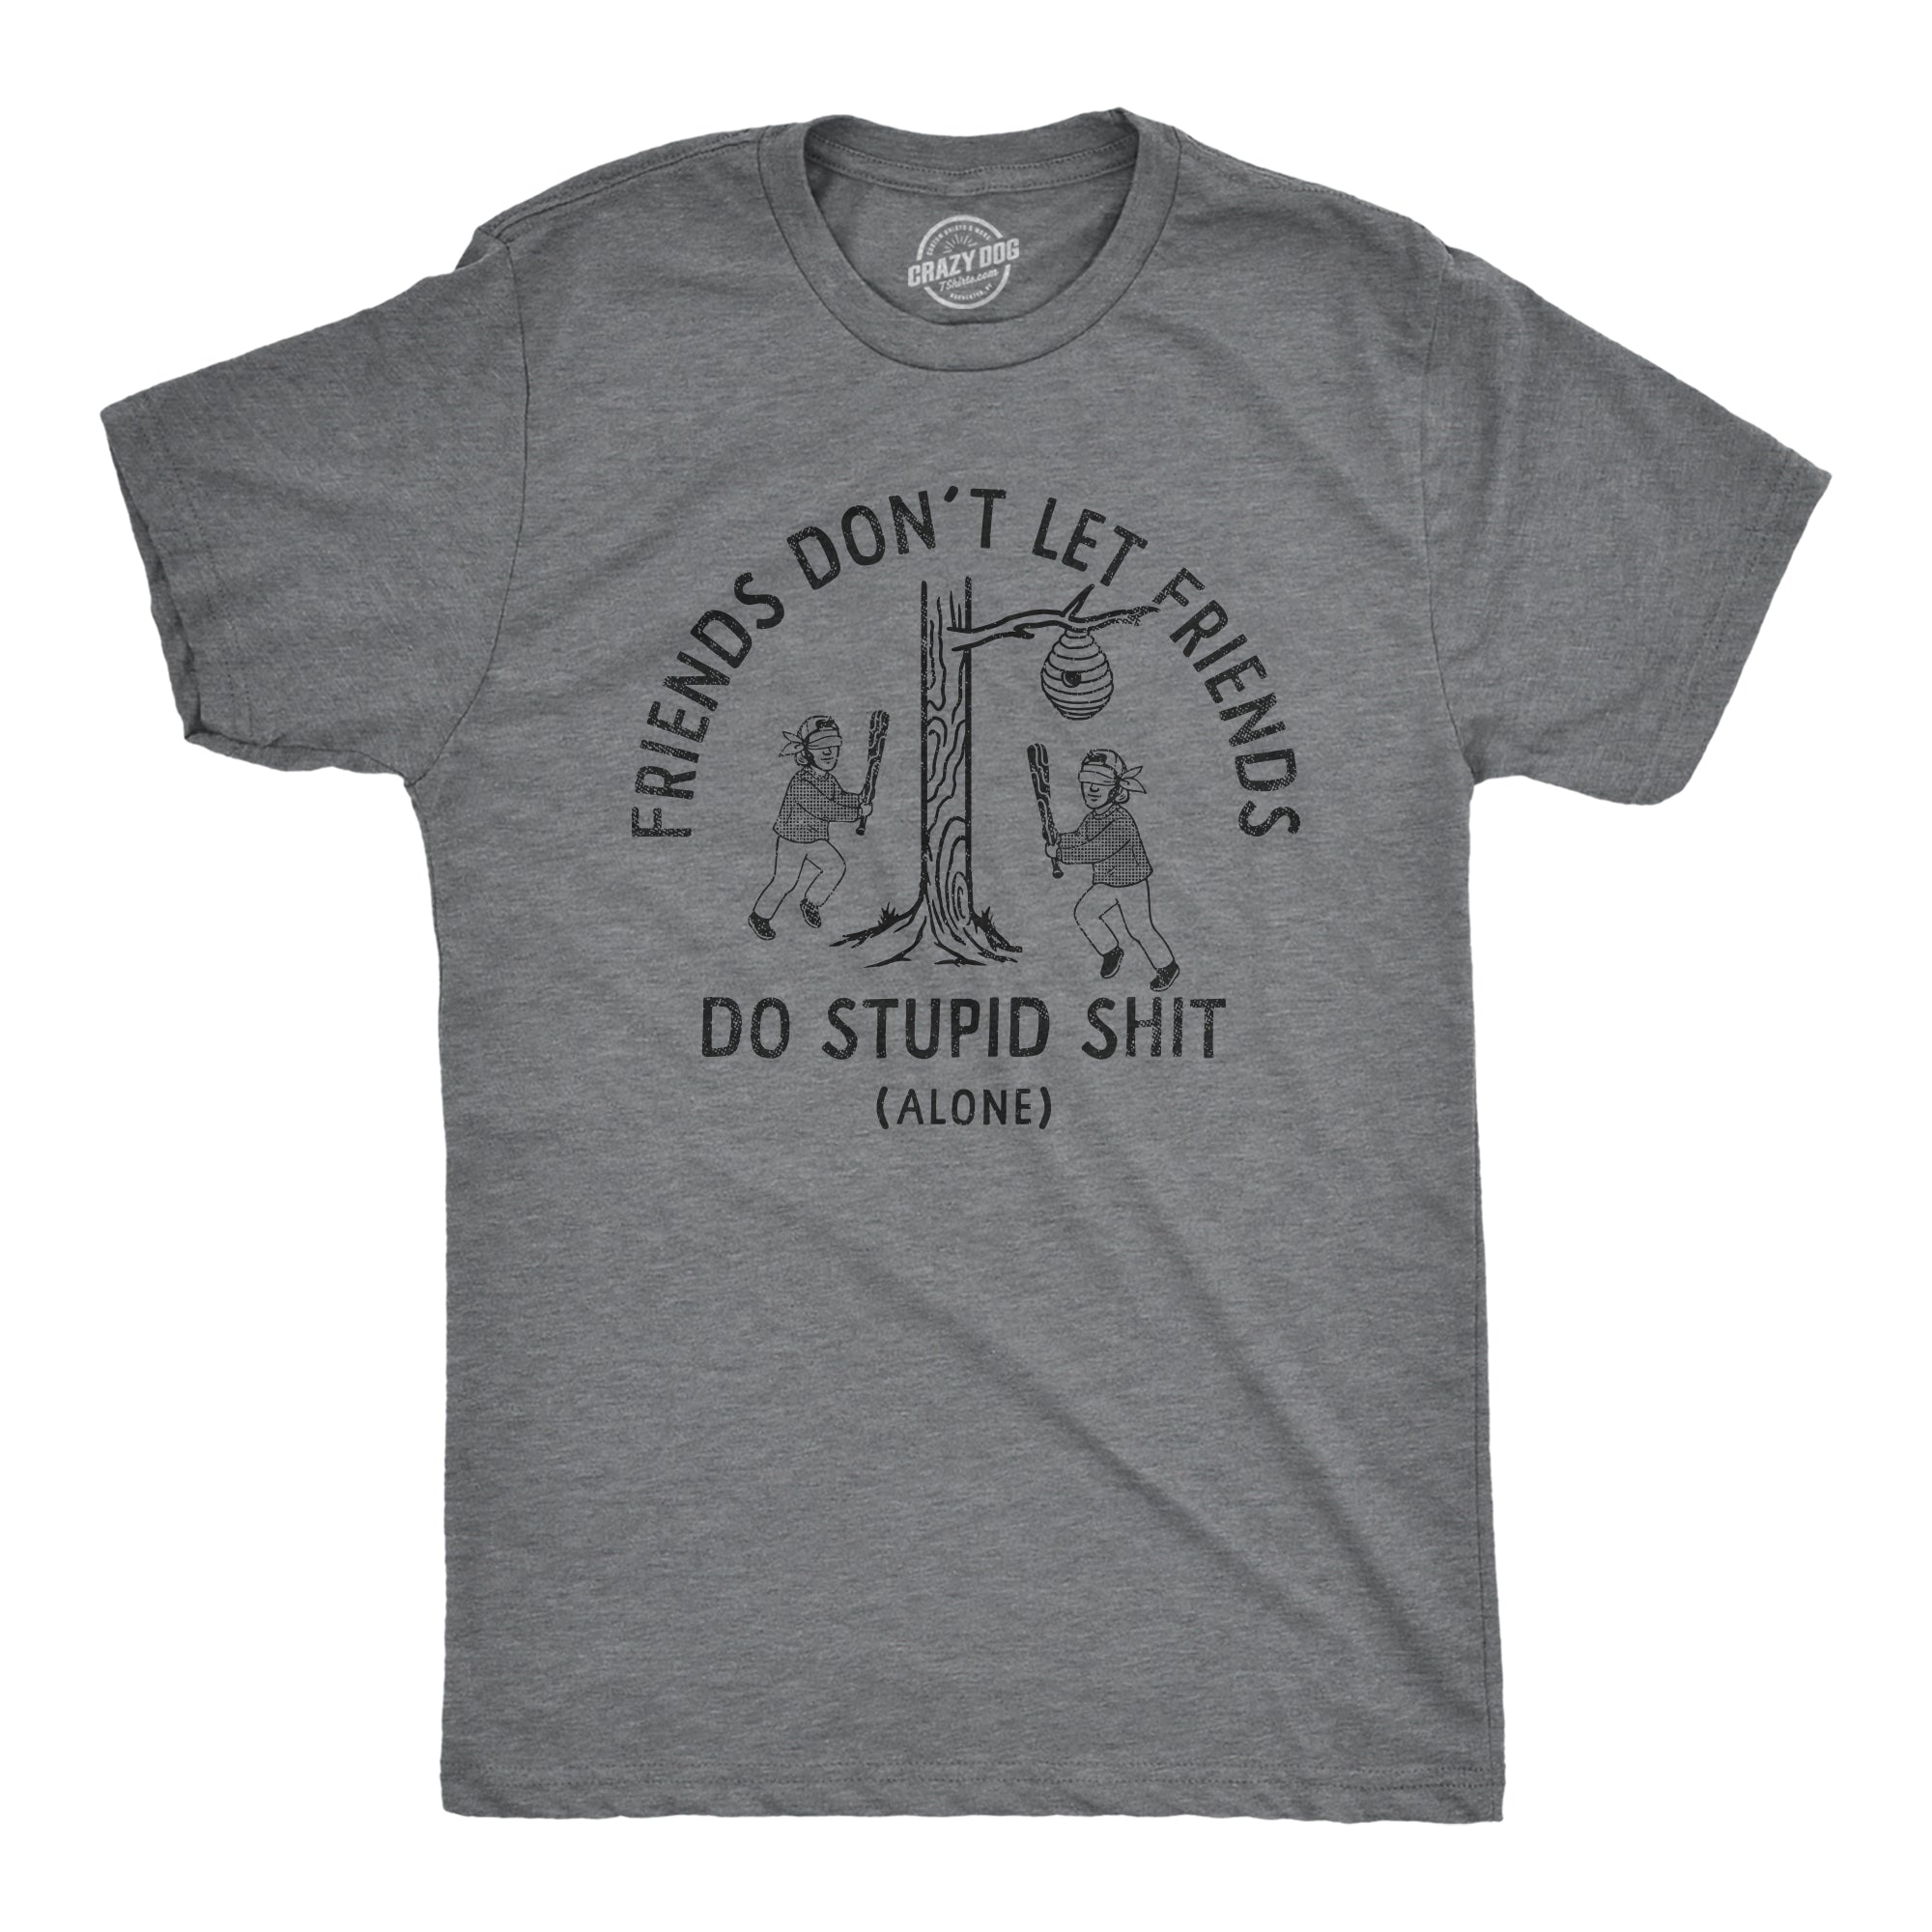 Funny Dark Heather Grey - STUPIDSHIT Friends Dont Let Friends Do Stupid Shit Alone Mens T Shirt Nerdy Sarcastic Tee